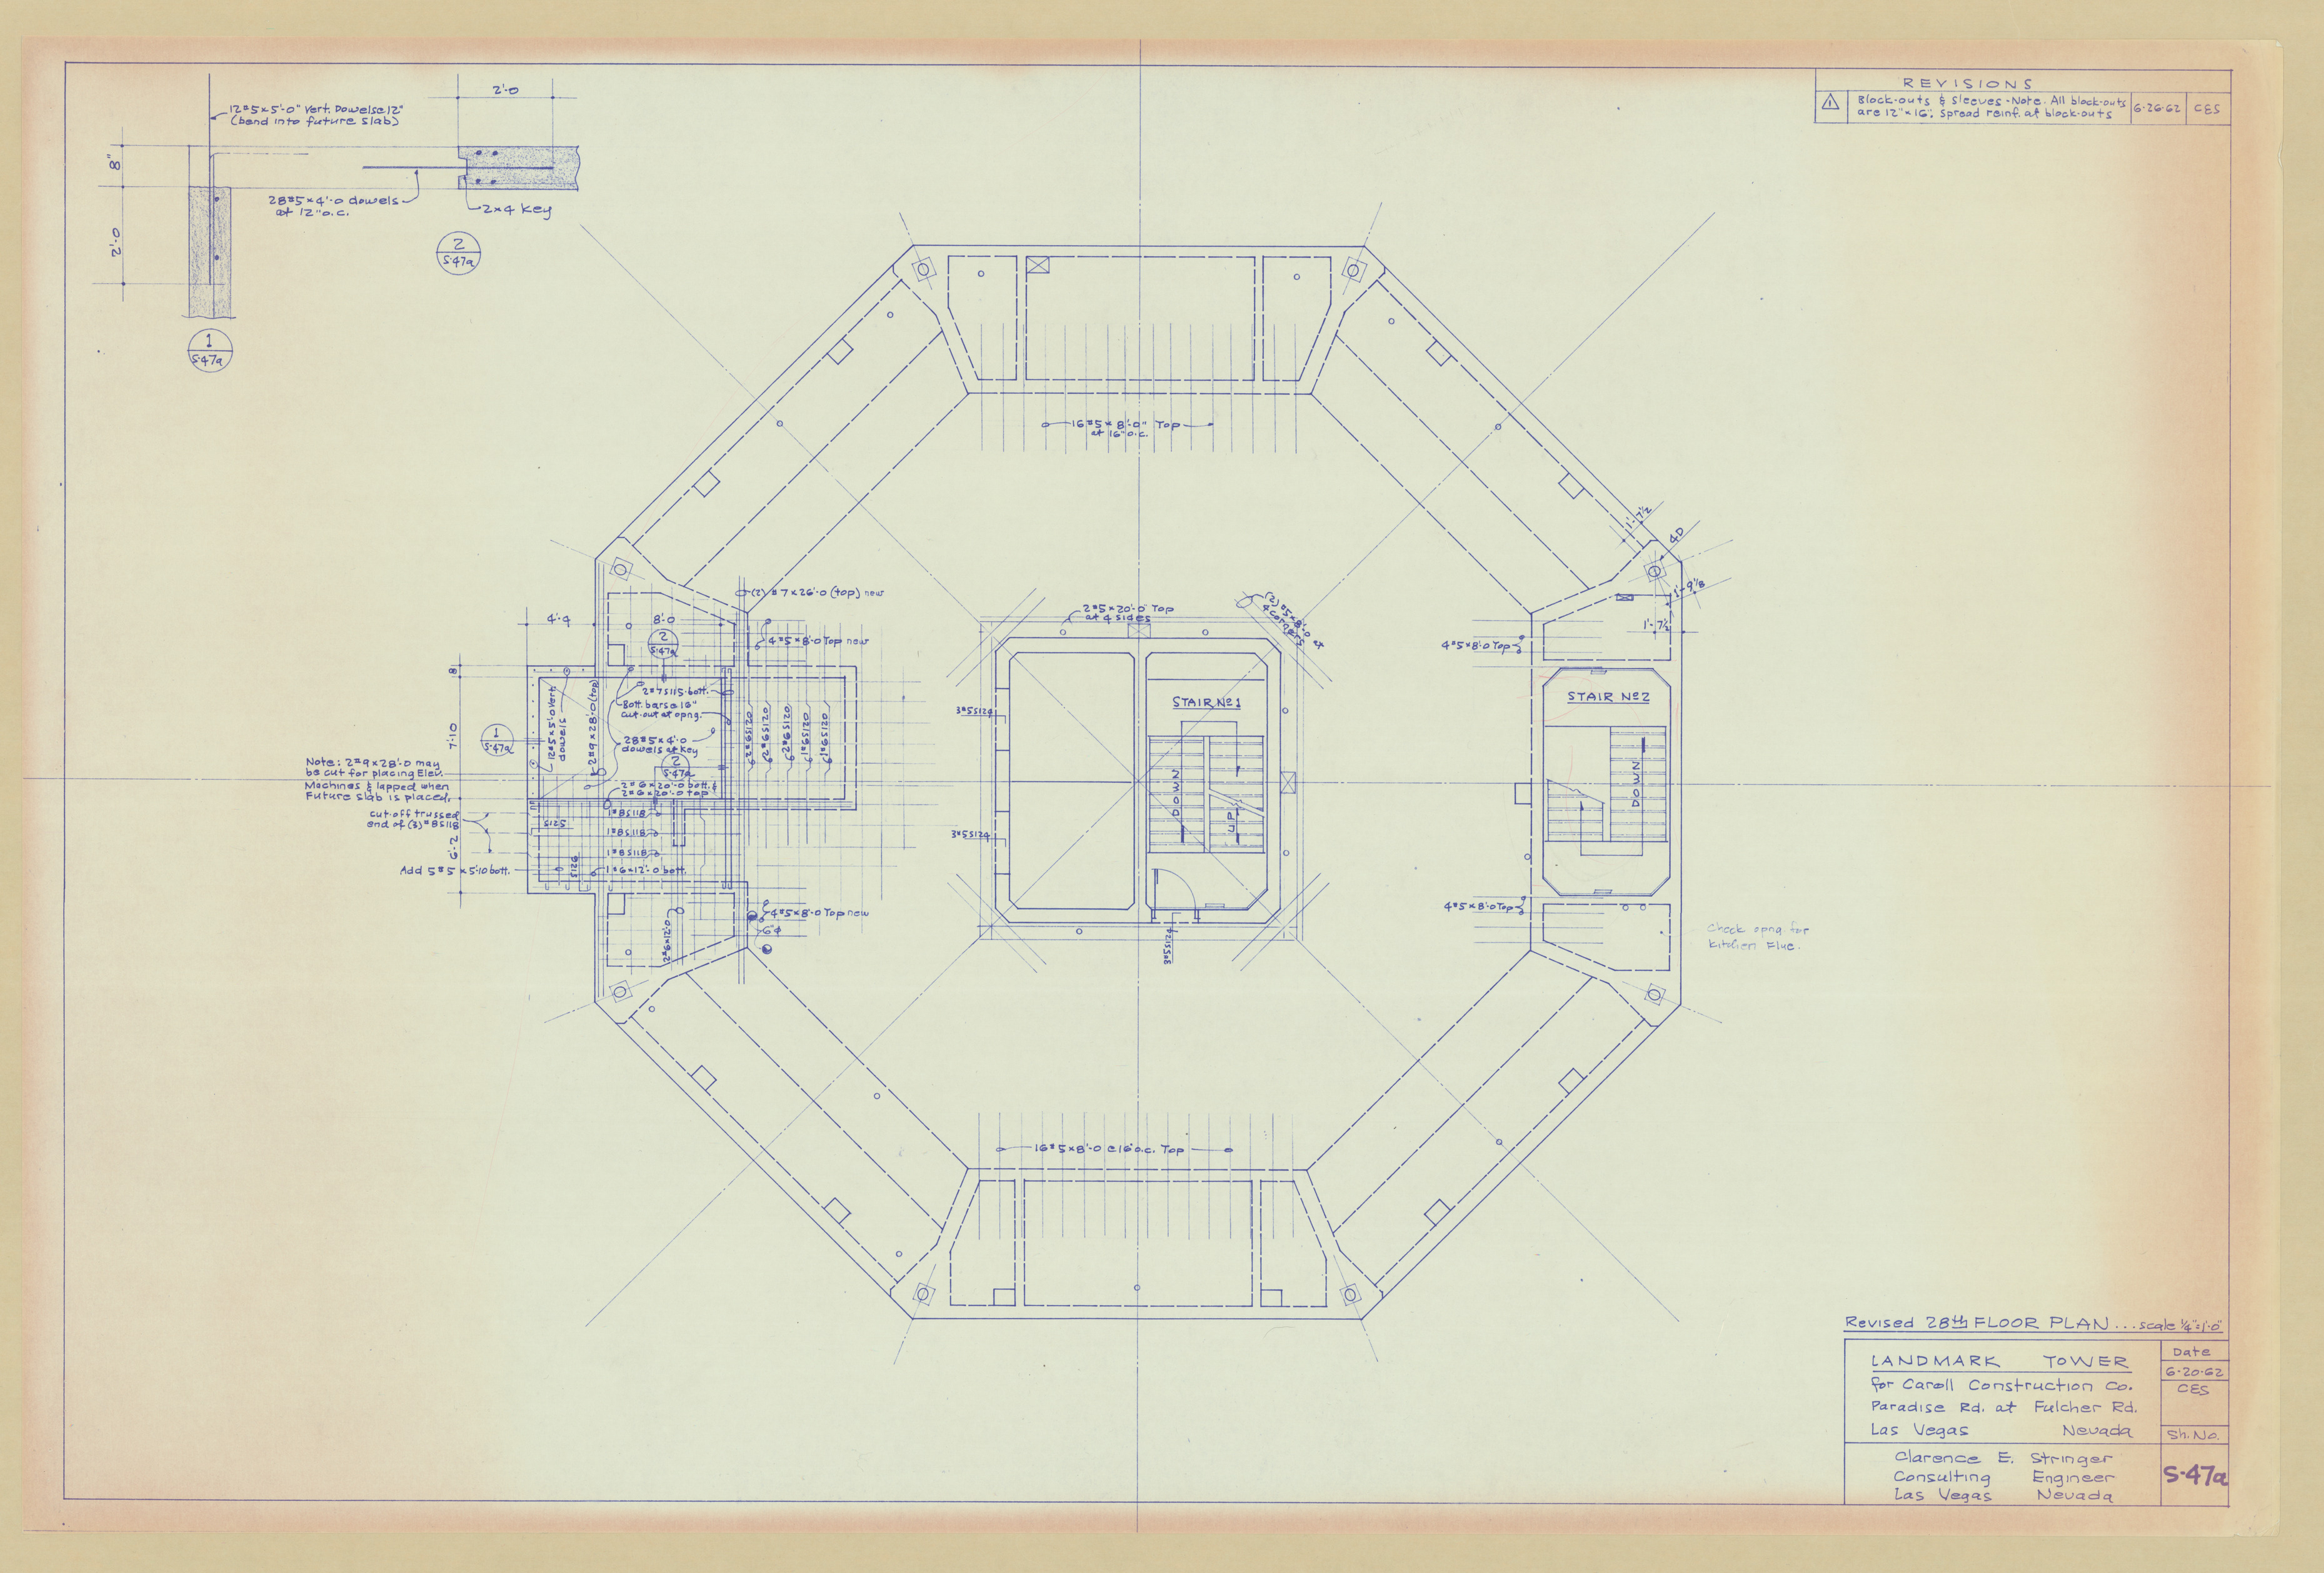 Original Landmark Tower structural drawings, sheets S1-S105: architectural drawings, image 038